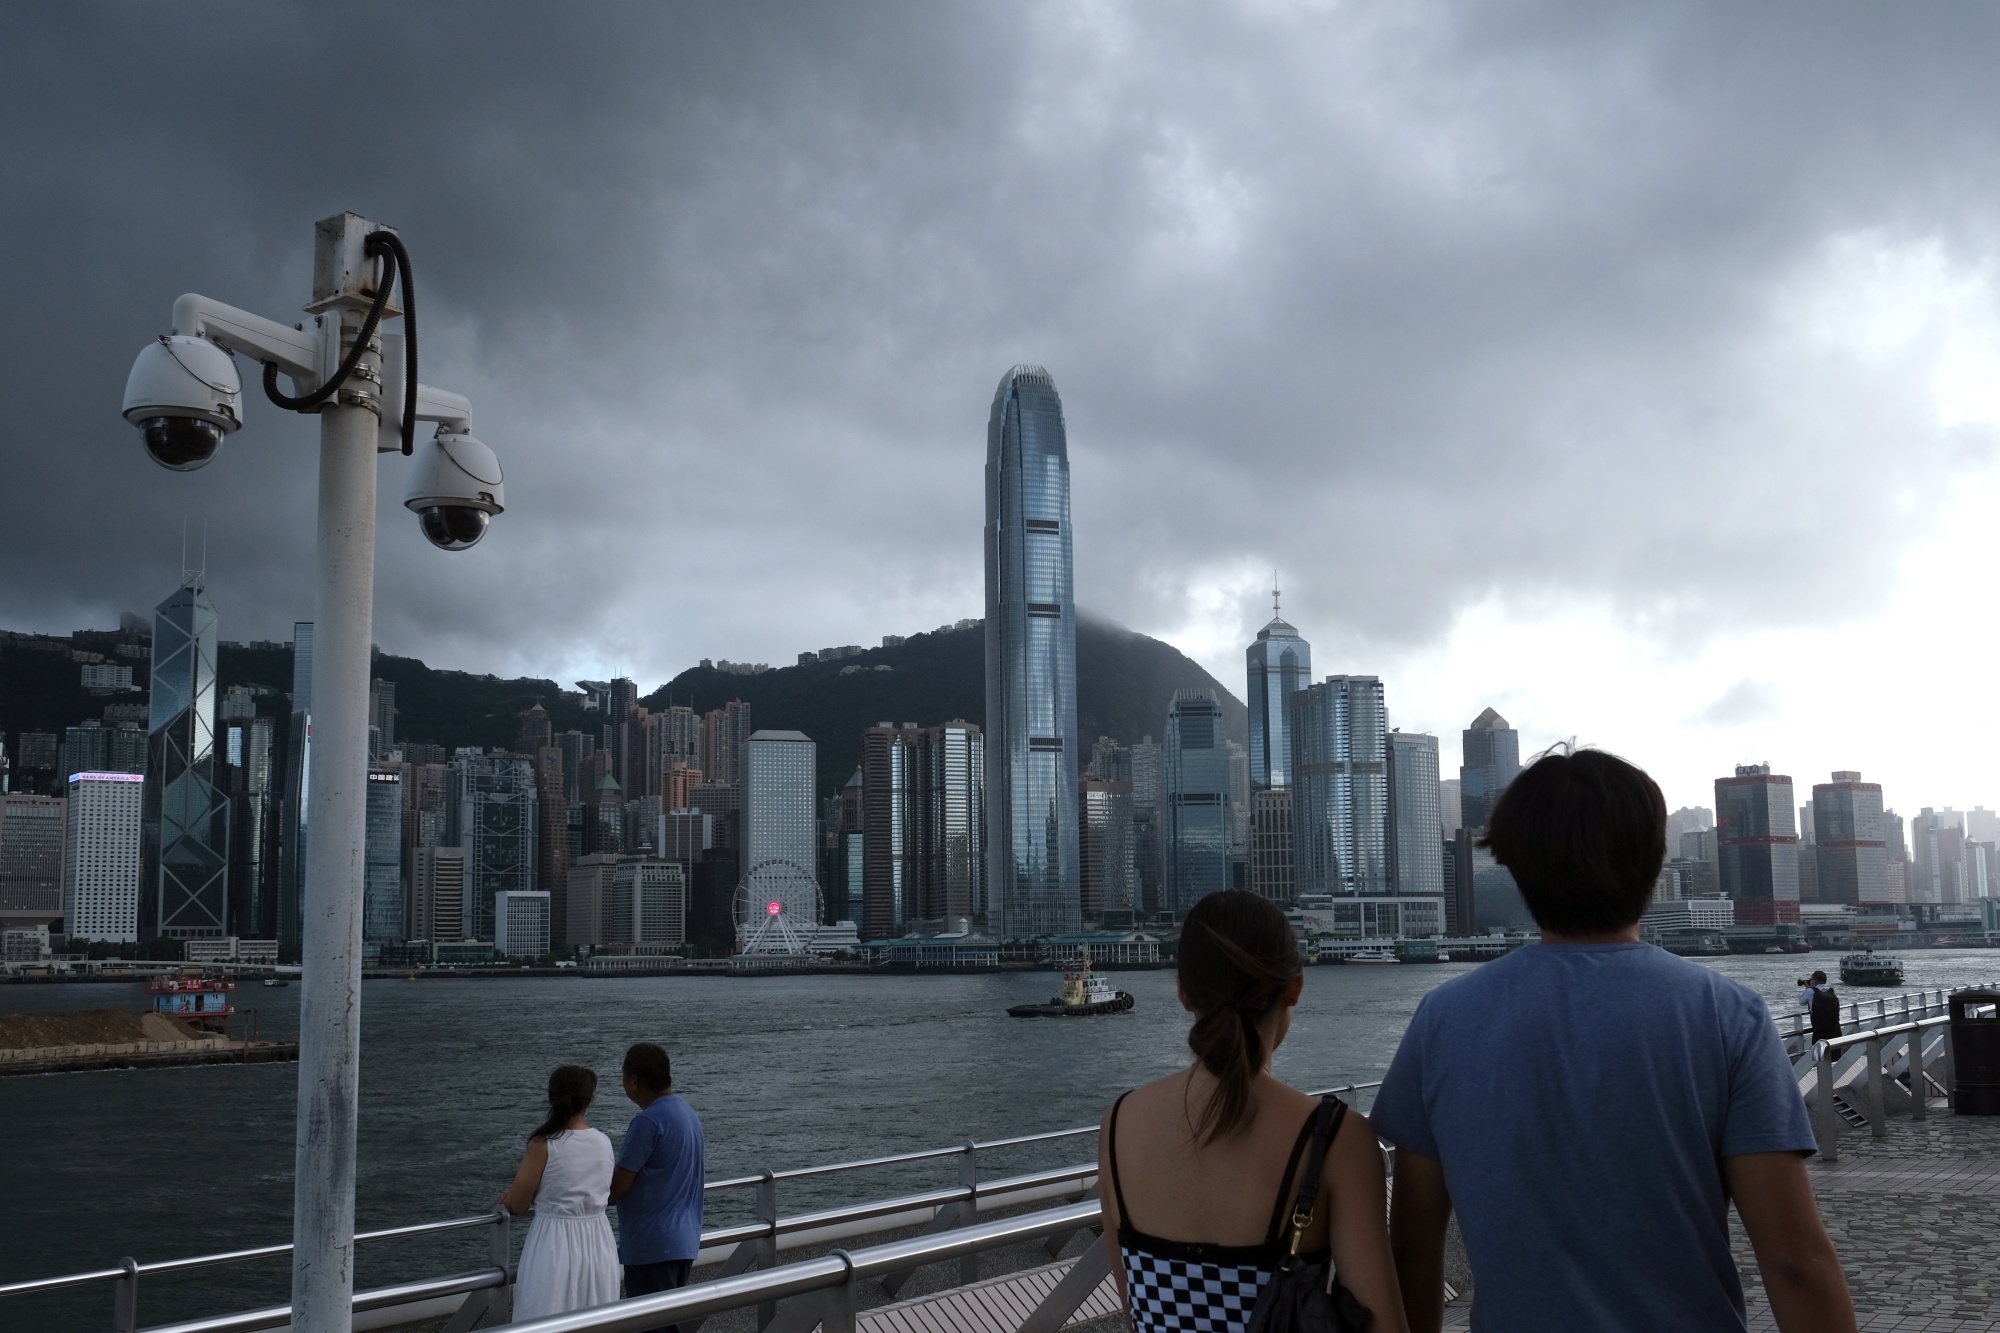 Pedestrians walk past a pair of security cameras along the Tsim Sha Tsui waterfront as buildings stand across Victoria Harbor in Hong Kong, on&nbsp;July 7.